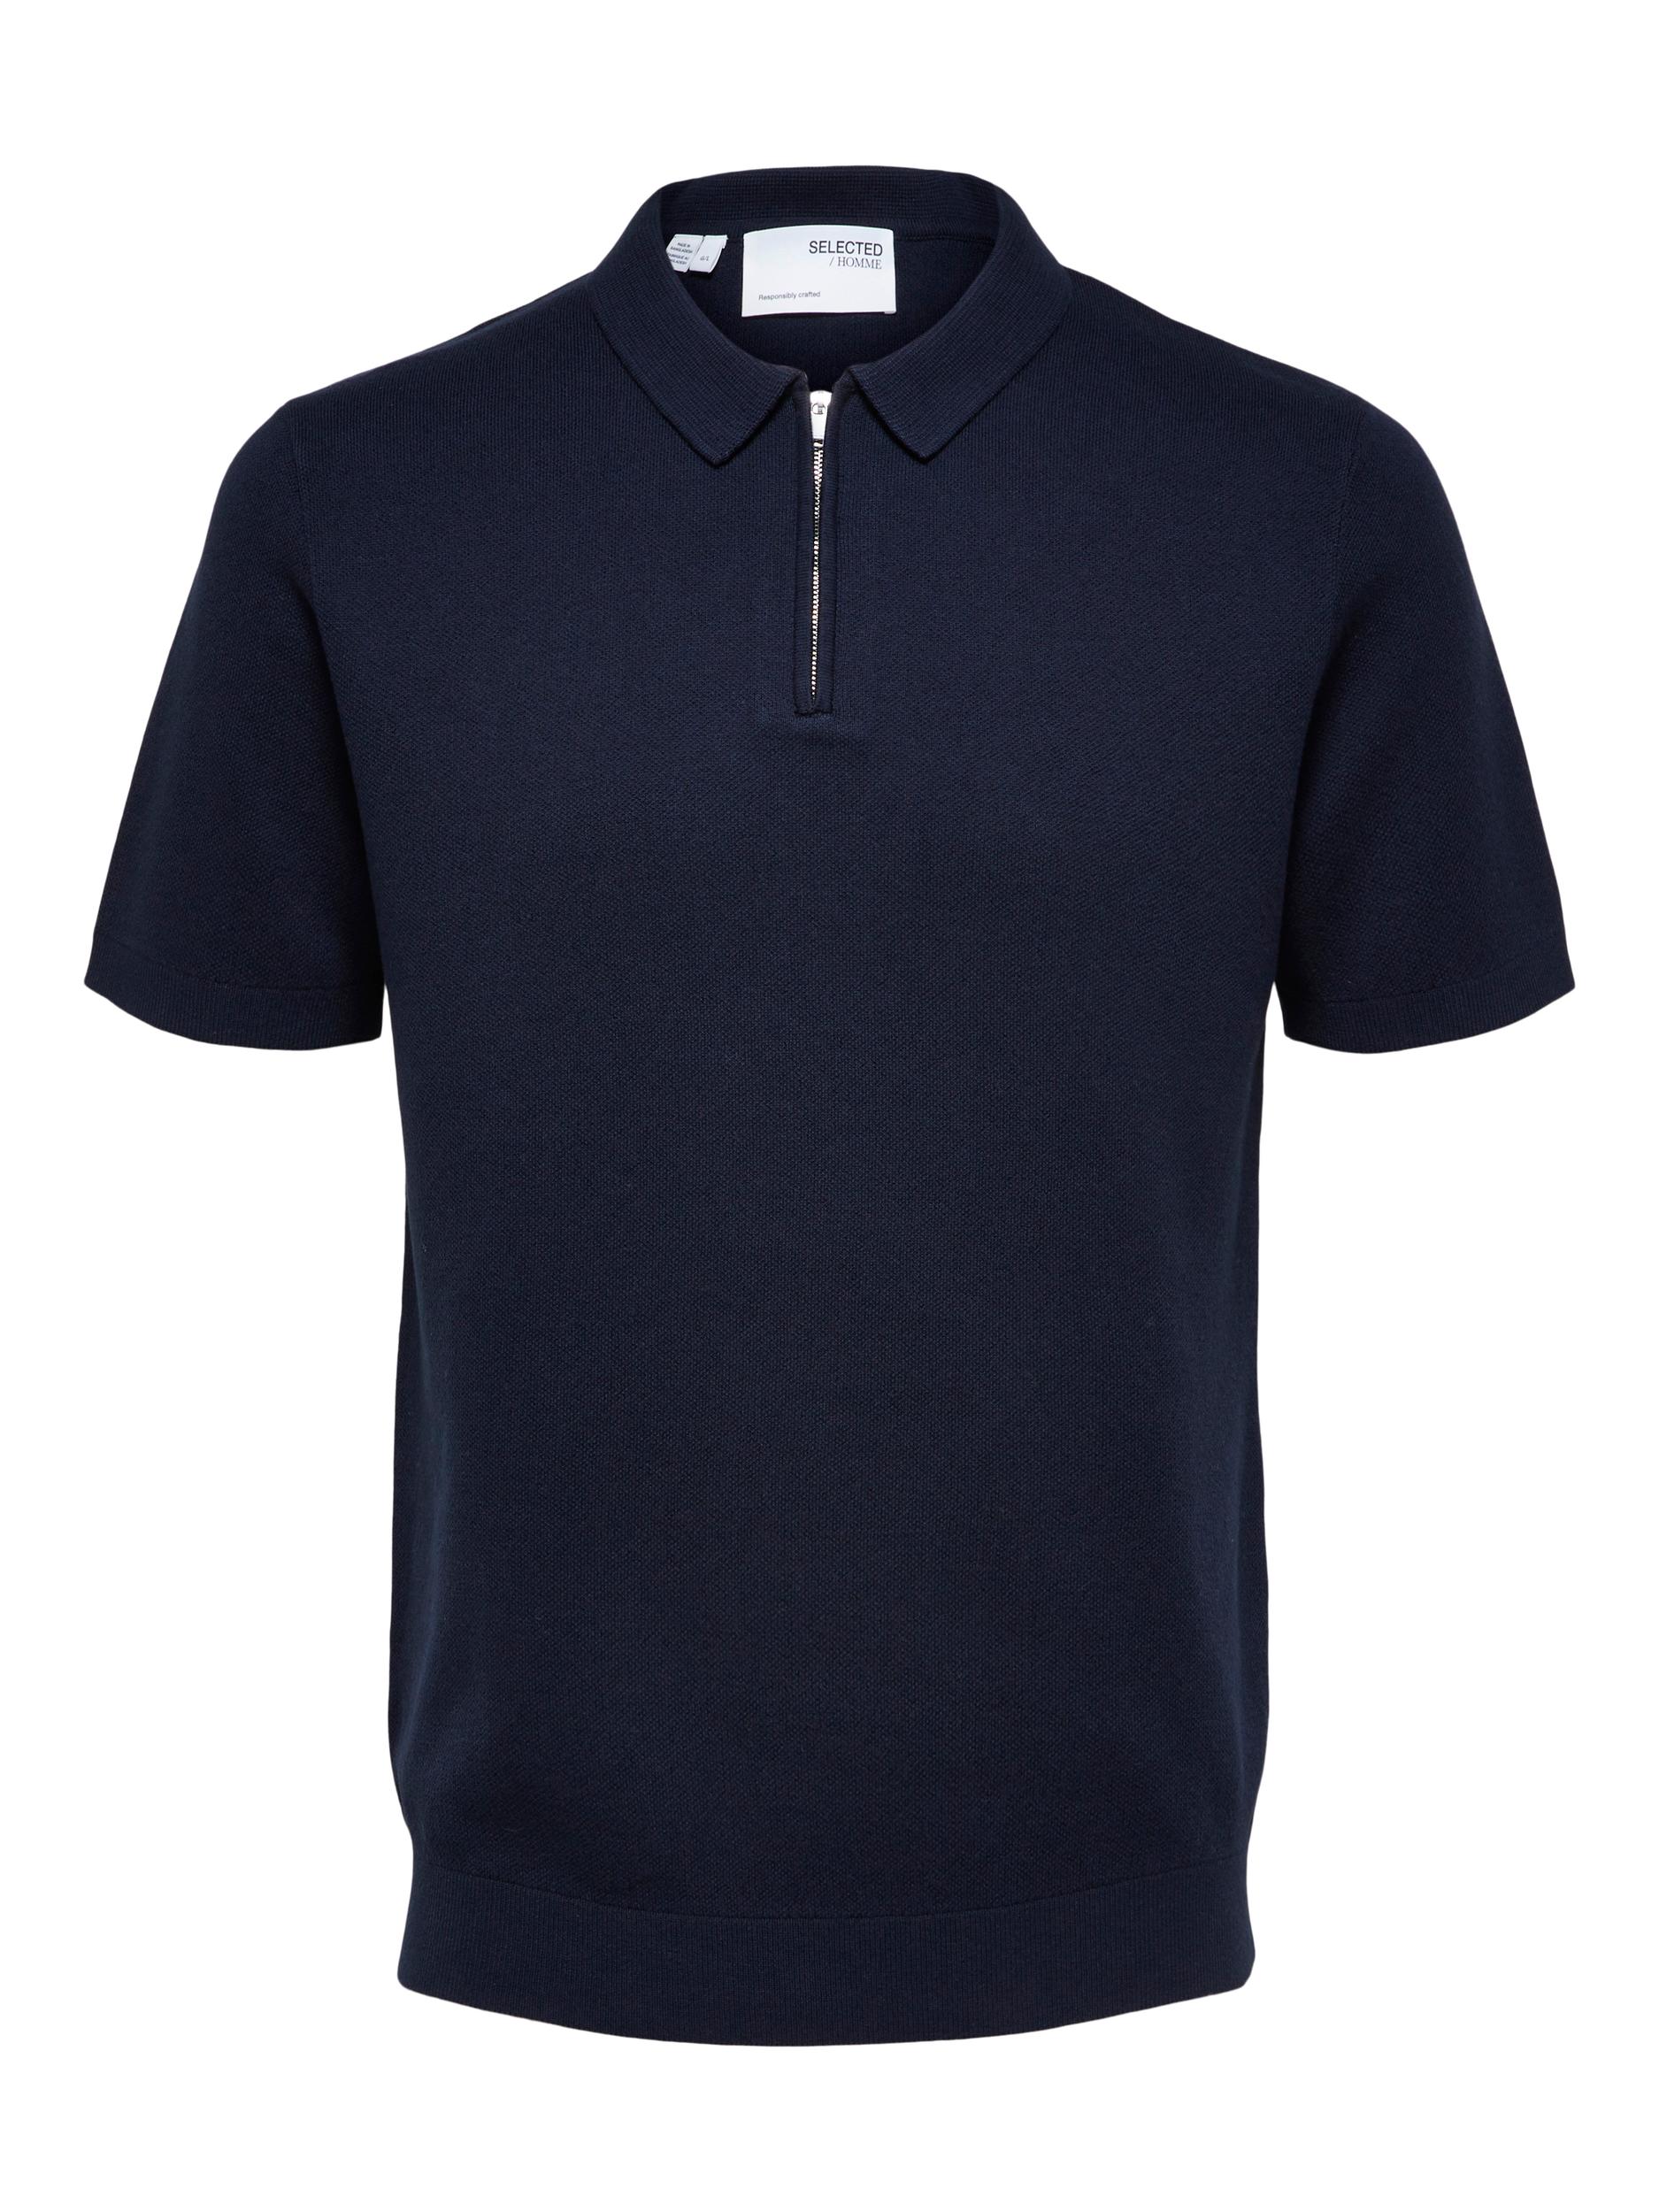 Selected Homme Florence Knit Polo - Sky Captain